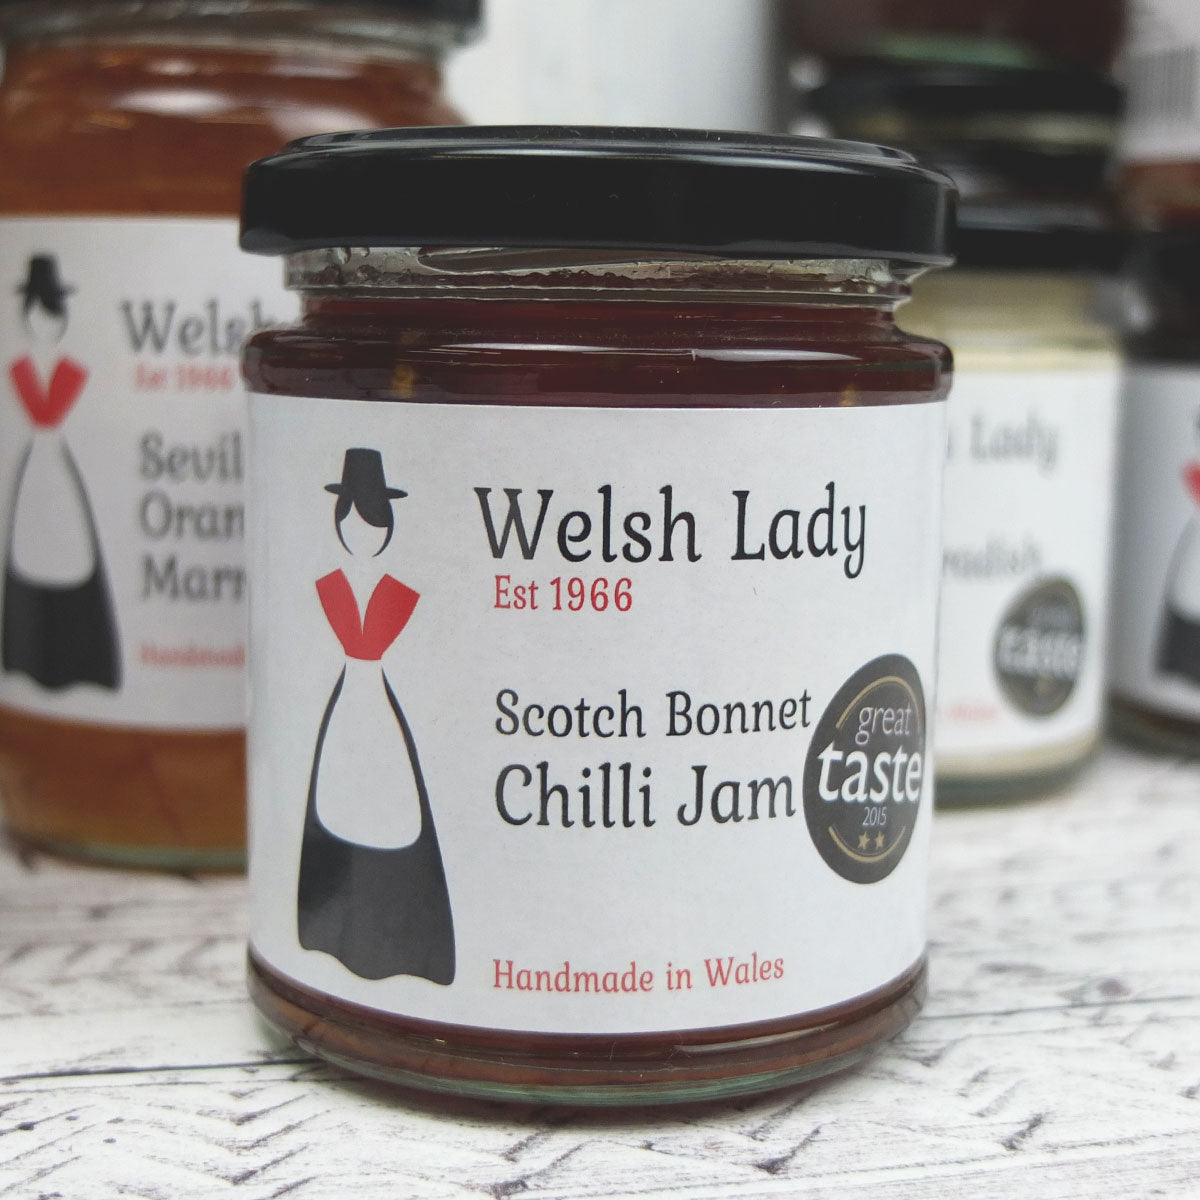 Chilli Jam by Welsh Lady Preserves